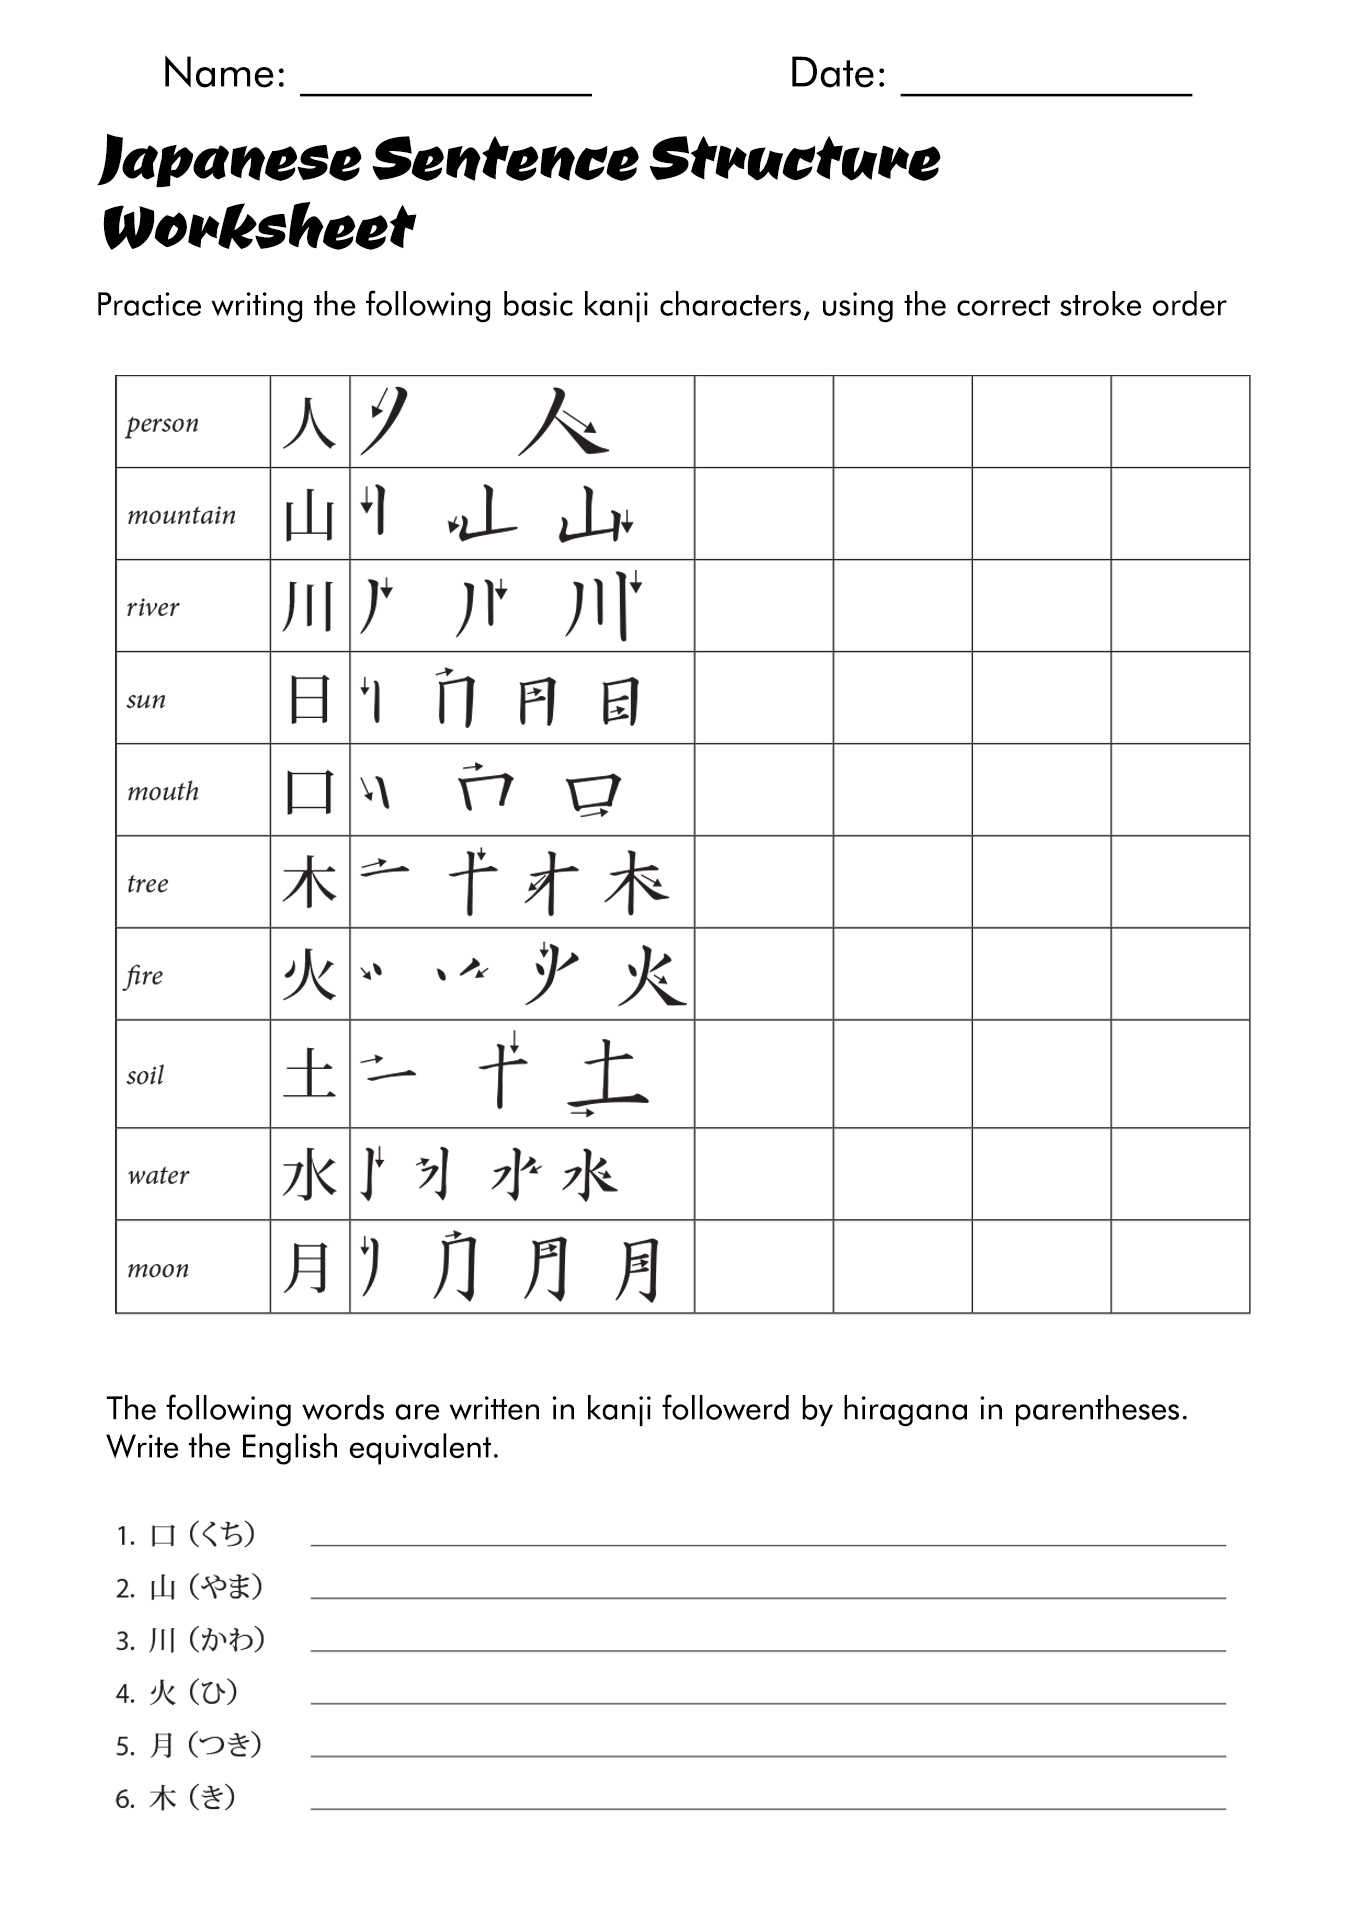 16-best-images-of-japanese-writing-worksheets-how-to-write-japanese-numbers-japanese-writing